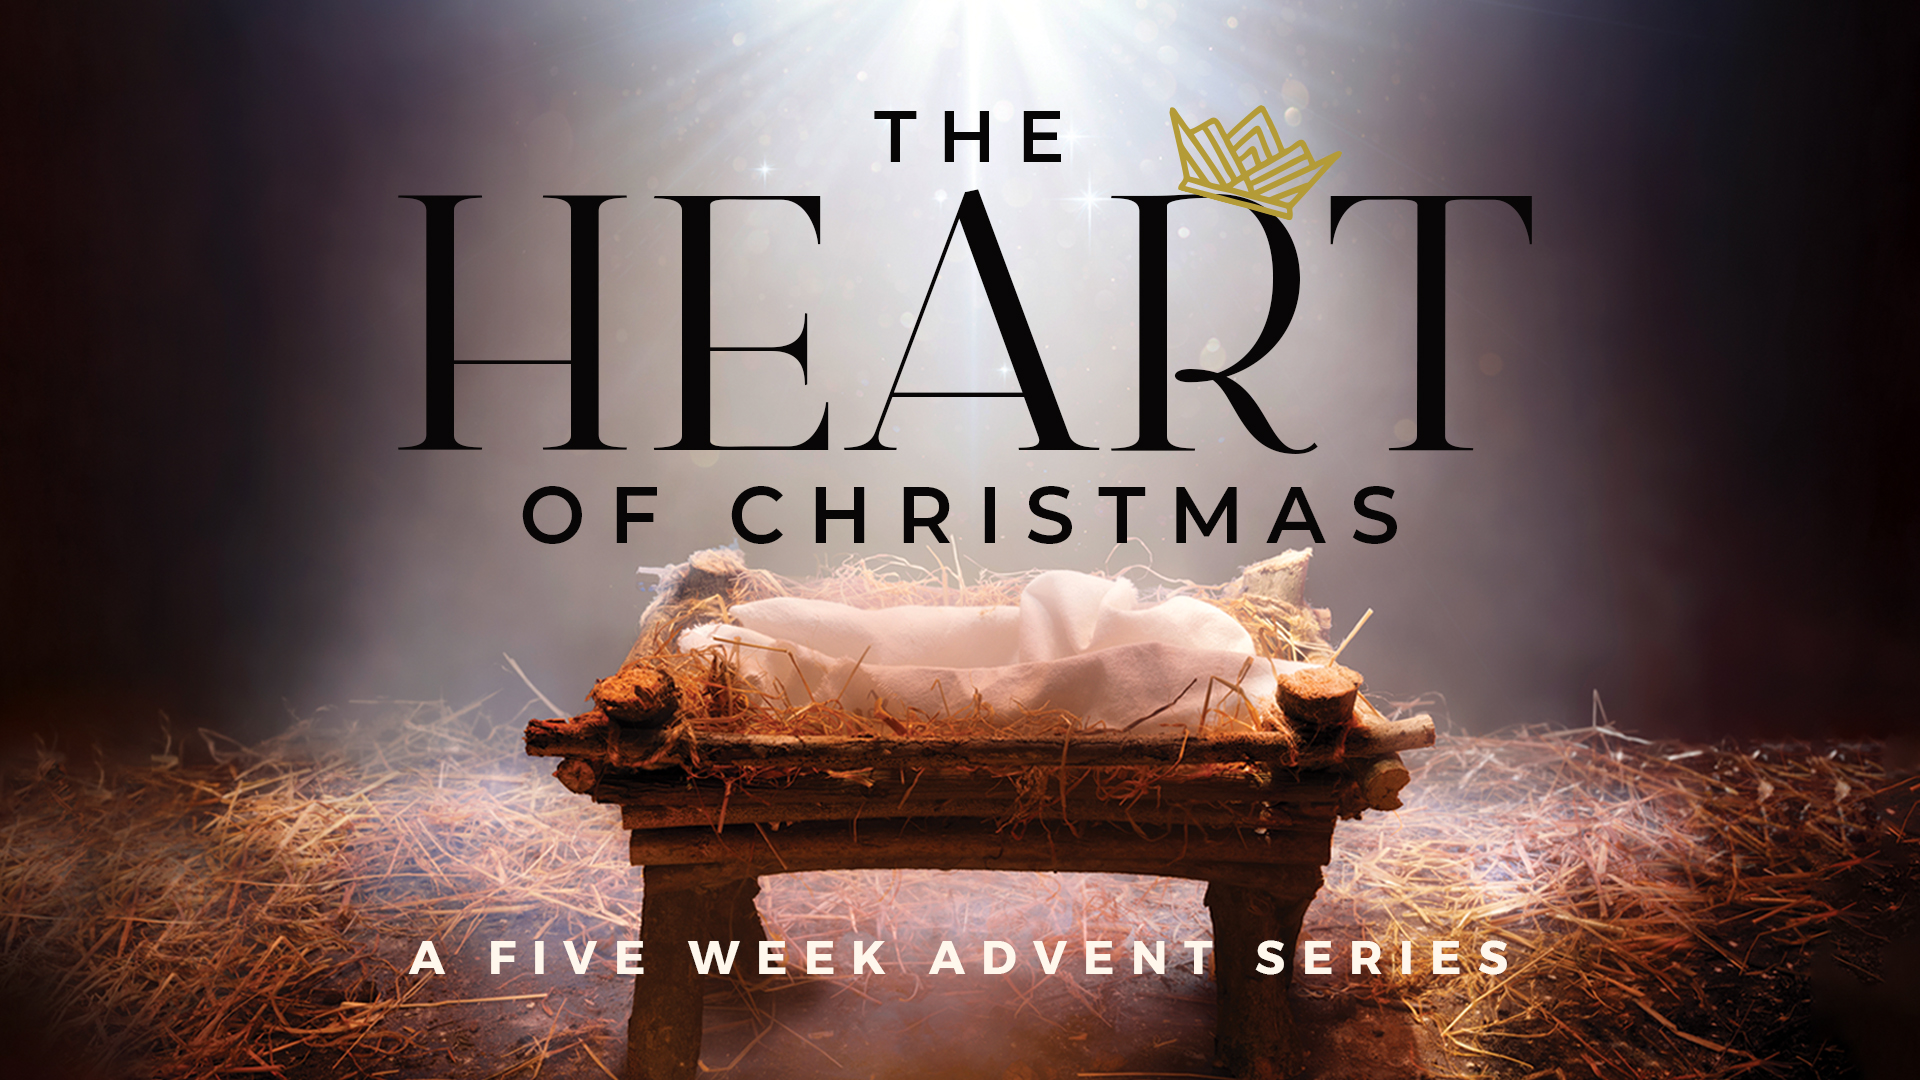 The Heart of Christmas Brings Joy In All Circumstances